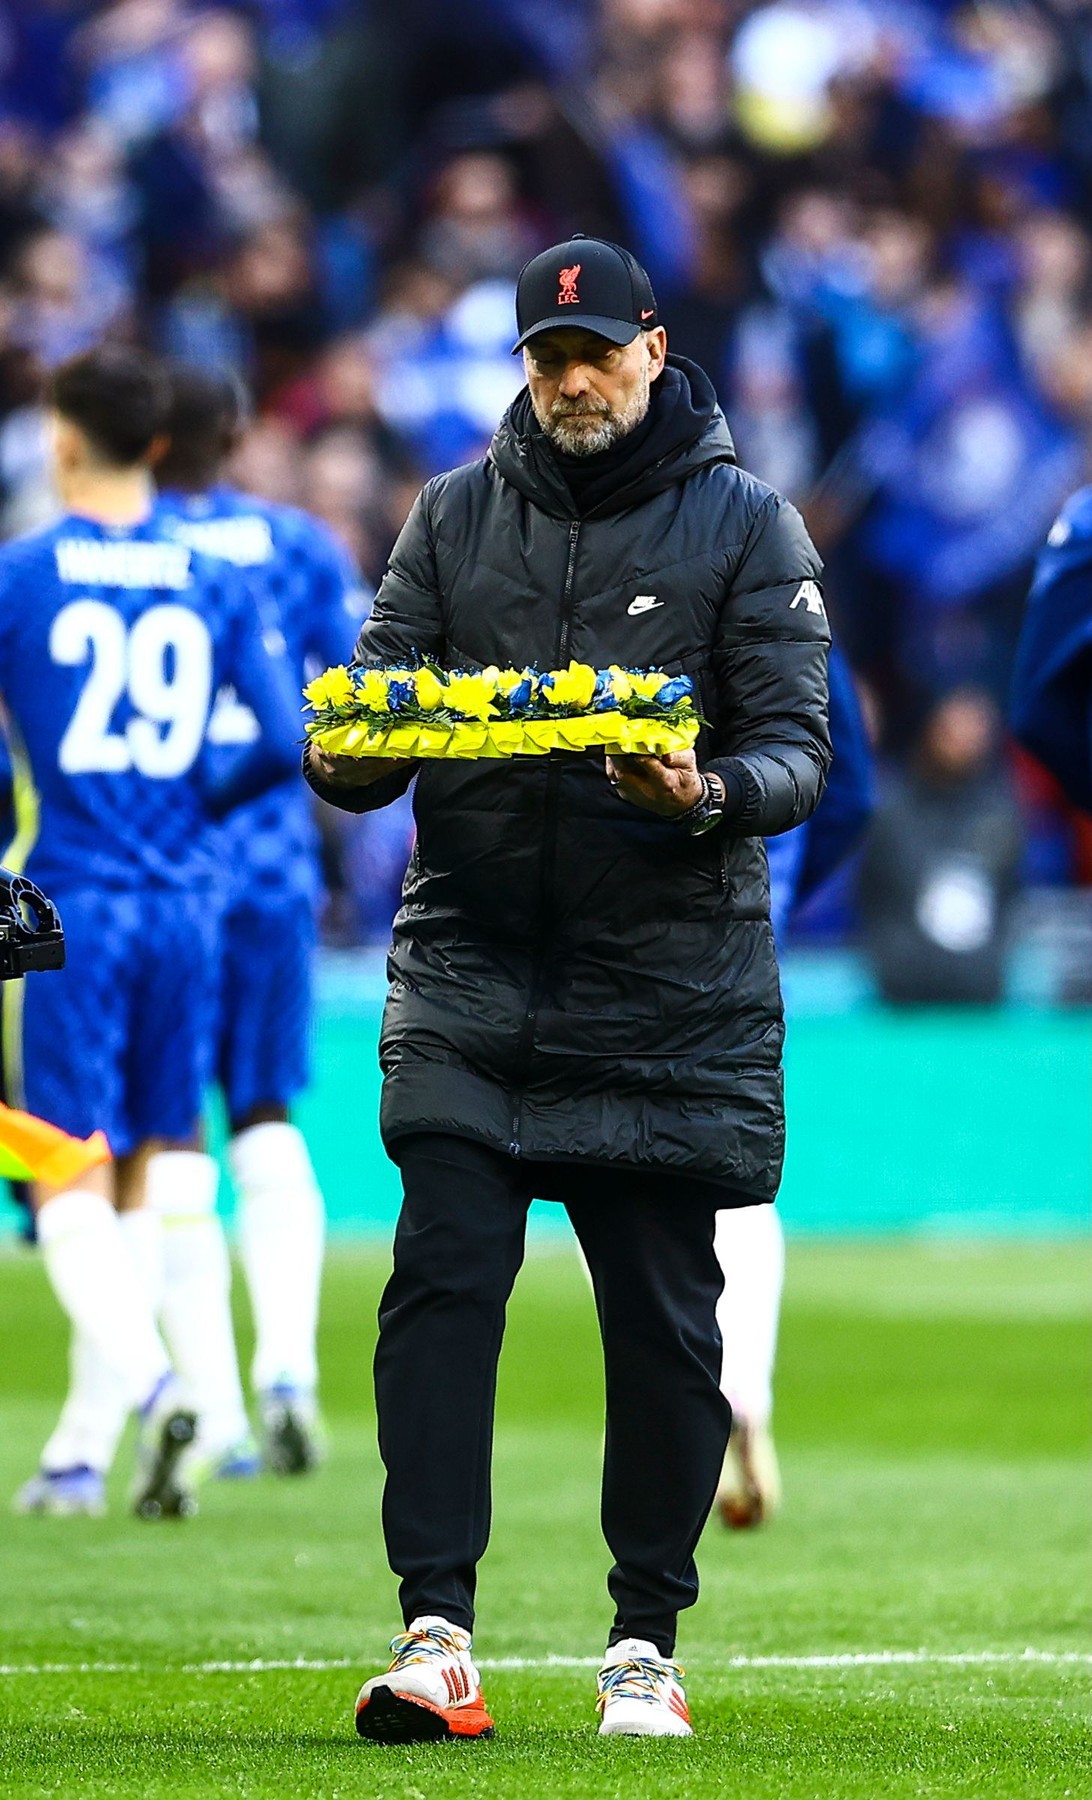 Jürgen Klopp manager of Liverpool hold a wreath in the colours of Ukraine
Chelsea v Liverpool, EFL Carabao Cup, Final, Football, Wembley Stadium, London, UK - 27 Feb 2022,Image: 665244232, License: Rights-managed, Restrictions: EDITORIAL USE ONLY No use with unauthorised audio, video, data, fixture lists, club/league logos or 